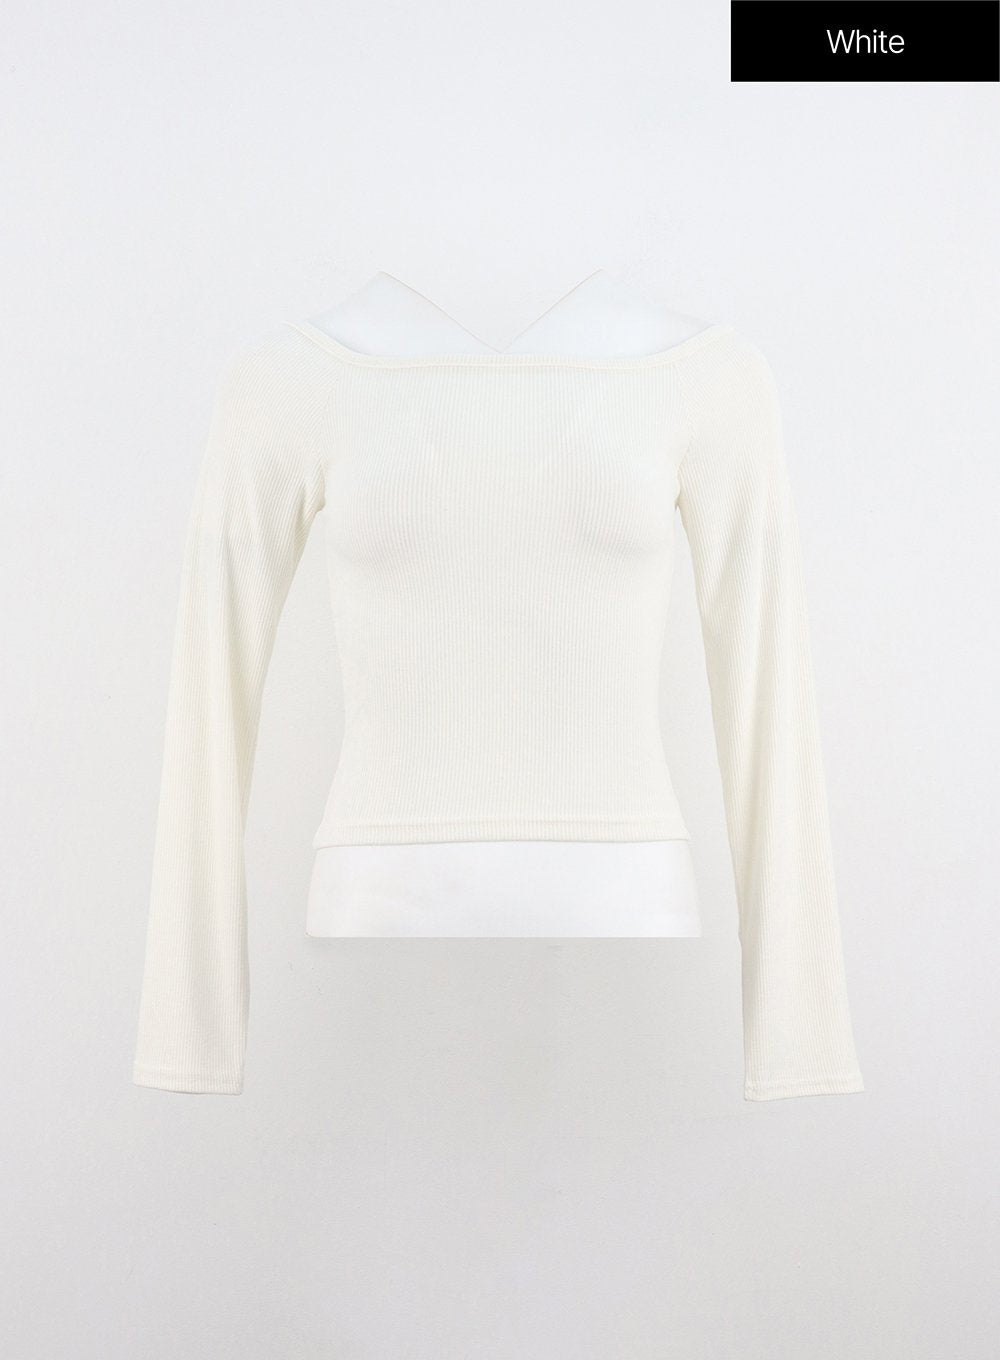 Boat Neck Long Sleeve Top White